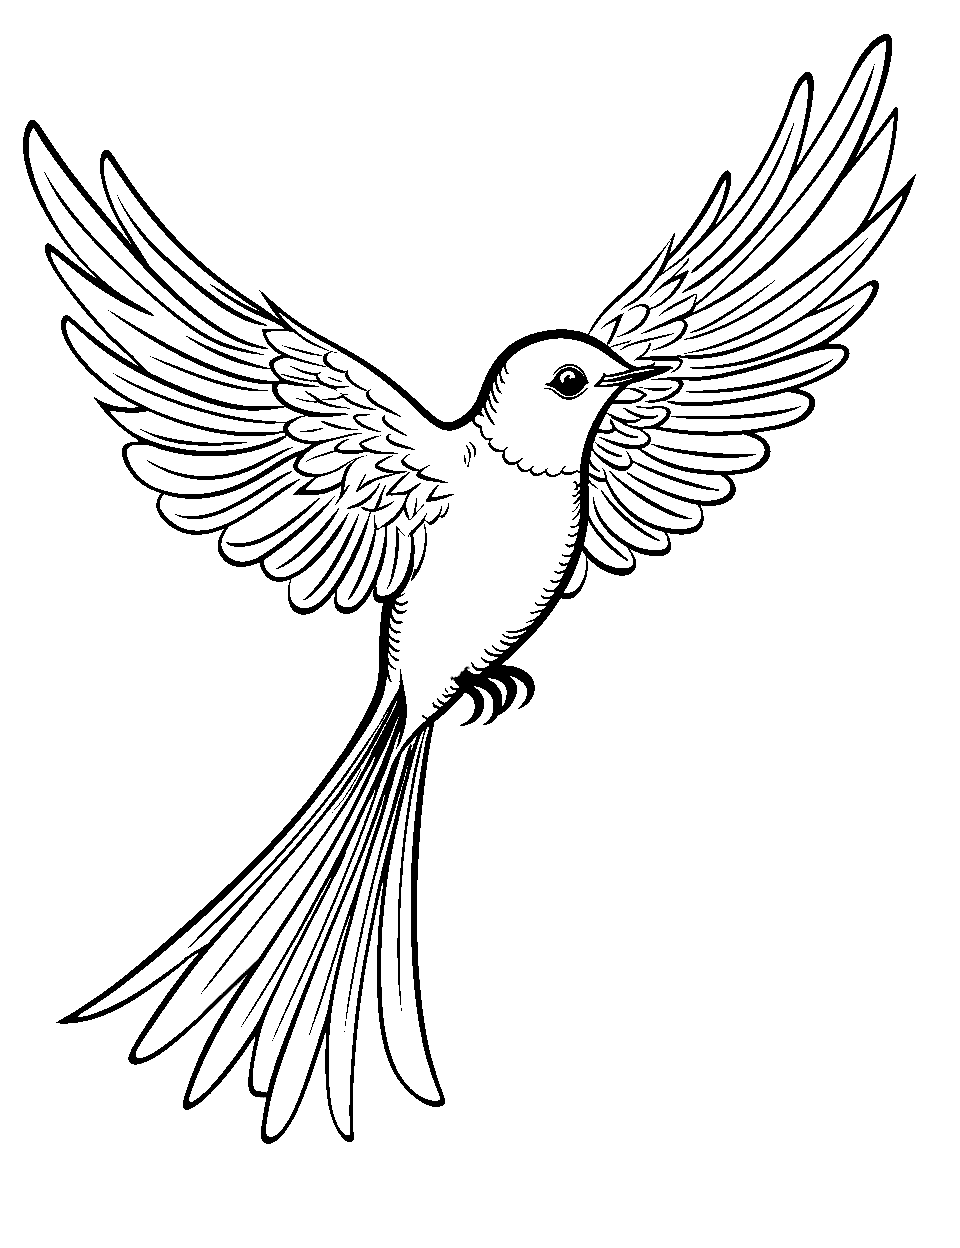 Swallow's Aerial Dance Coloring Page - A swallow performing a mesmerizing aerial dance.